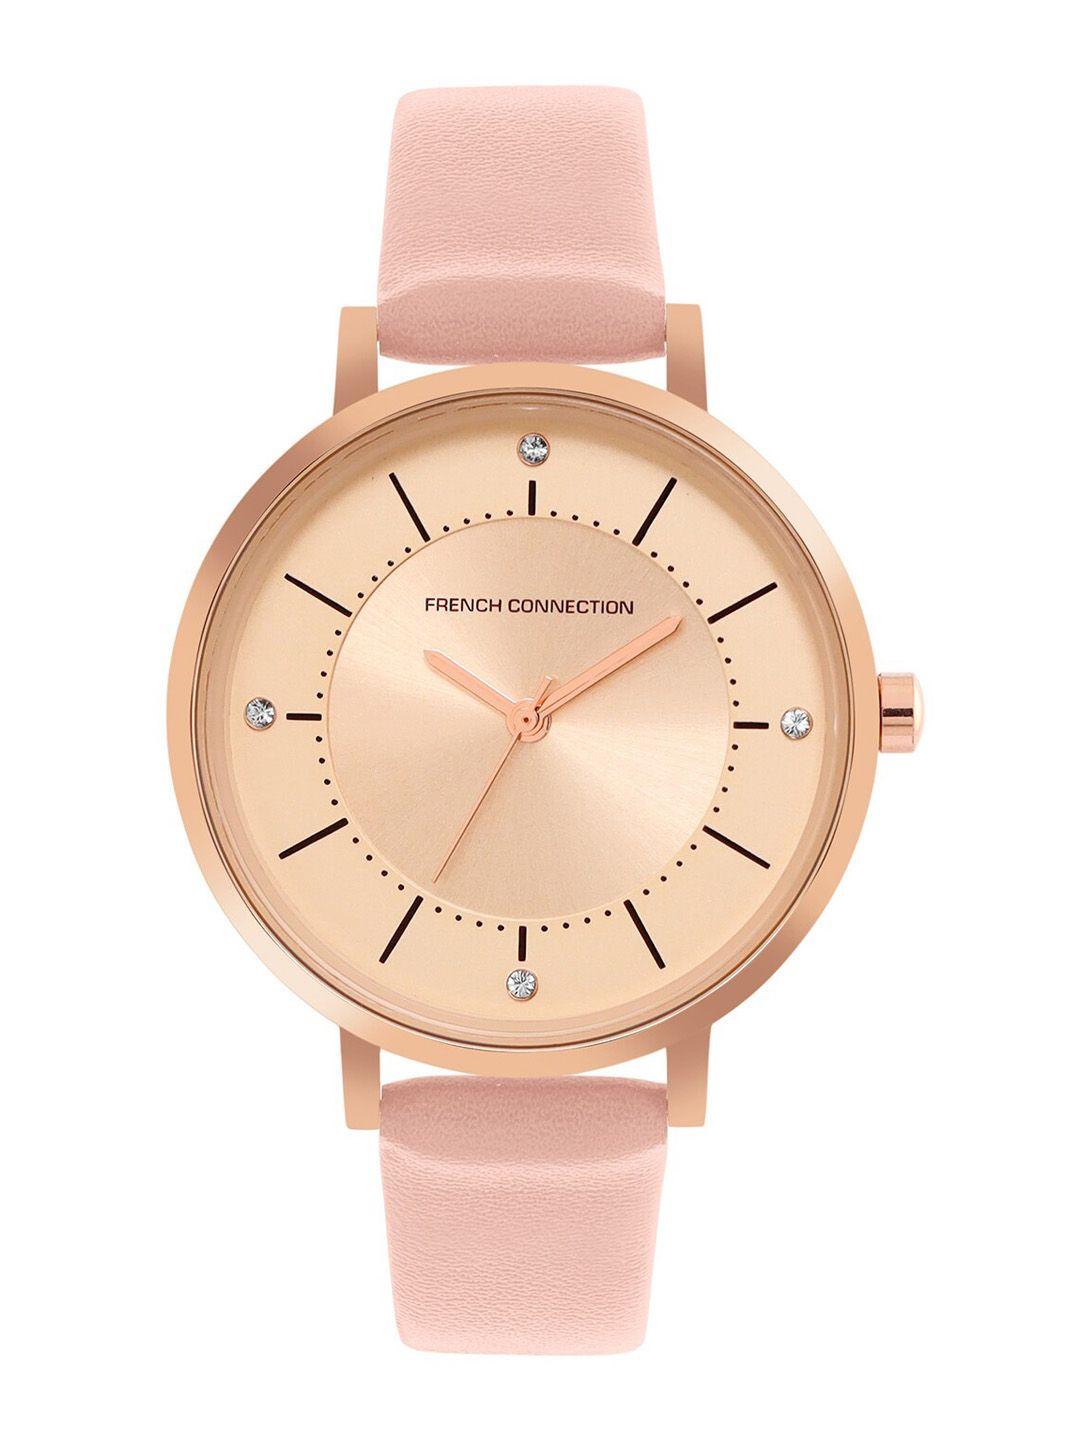 french-connection-embellished-dial-&-leather-straps-analogue-watch-fcn00010a